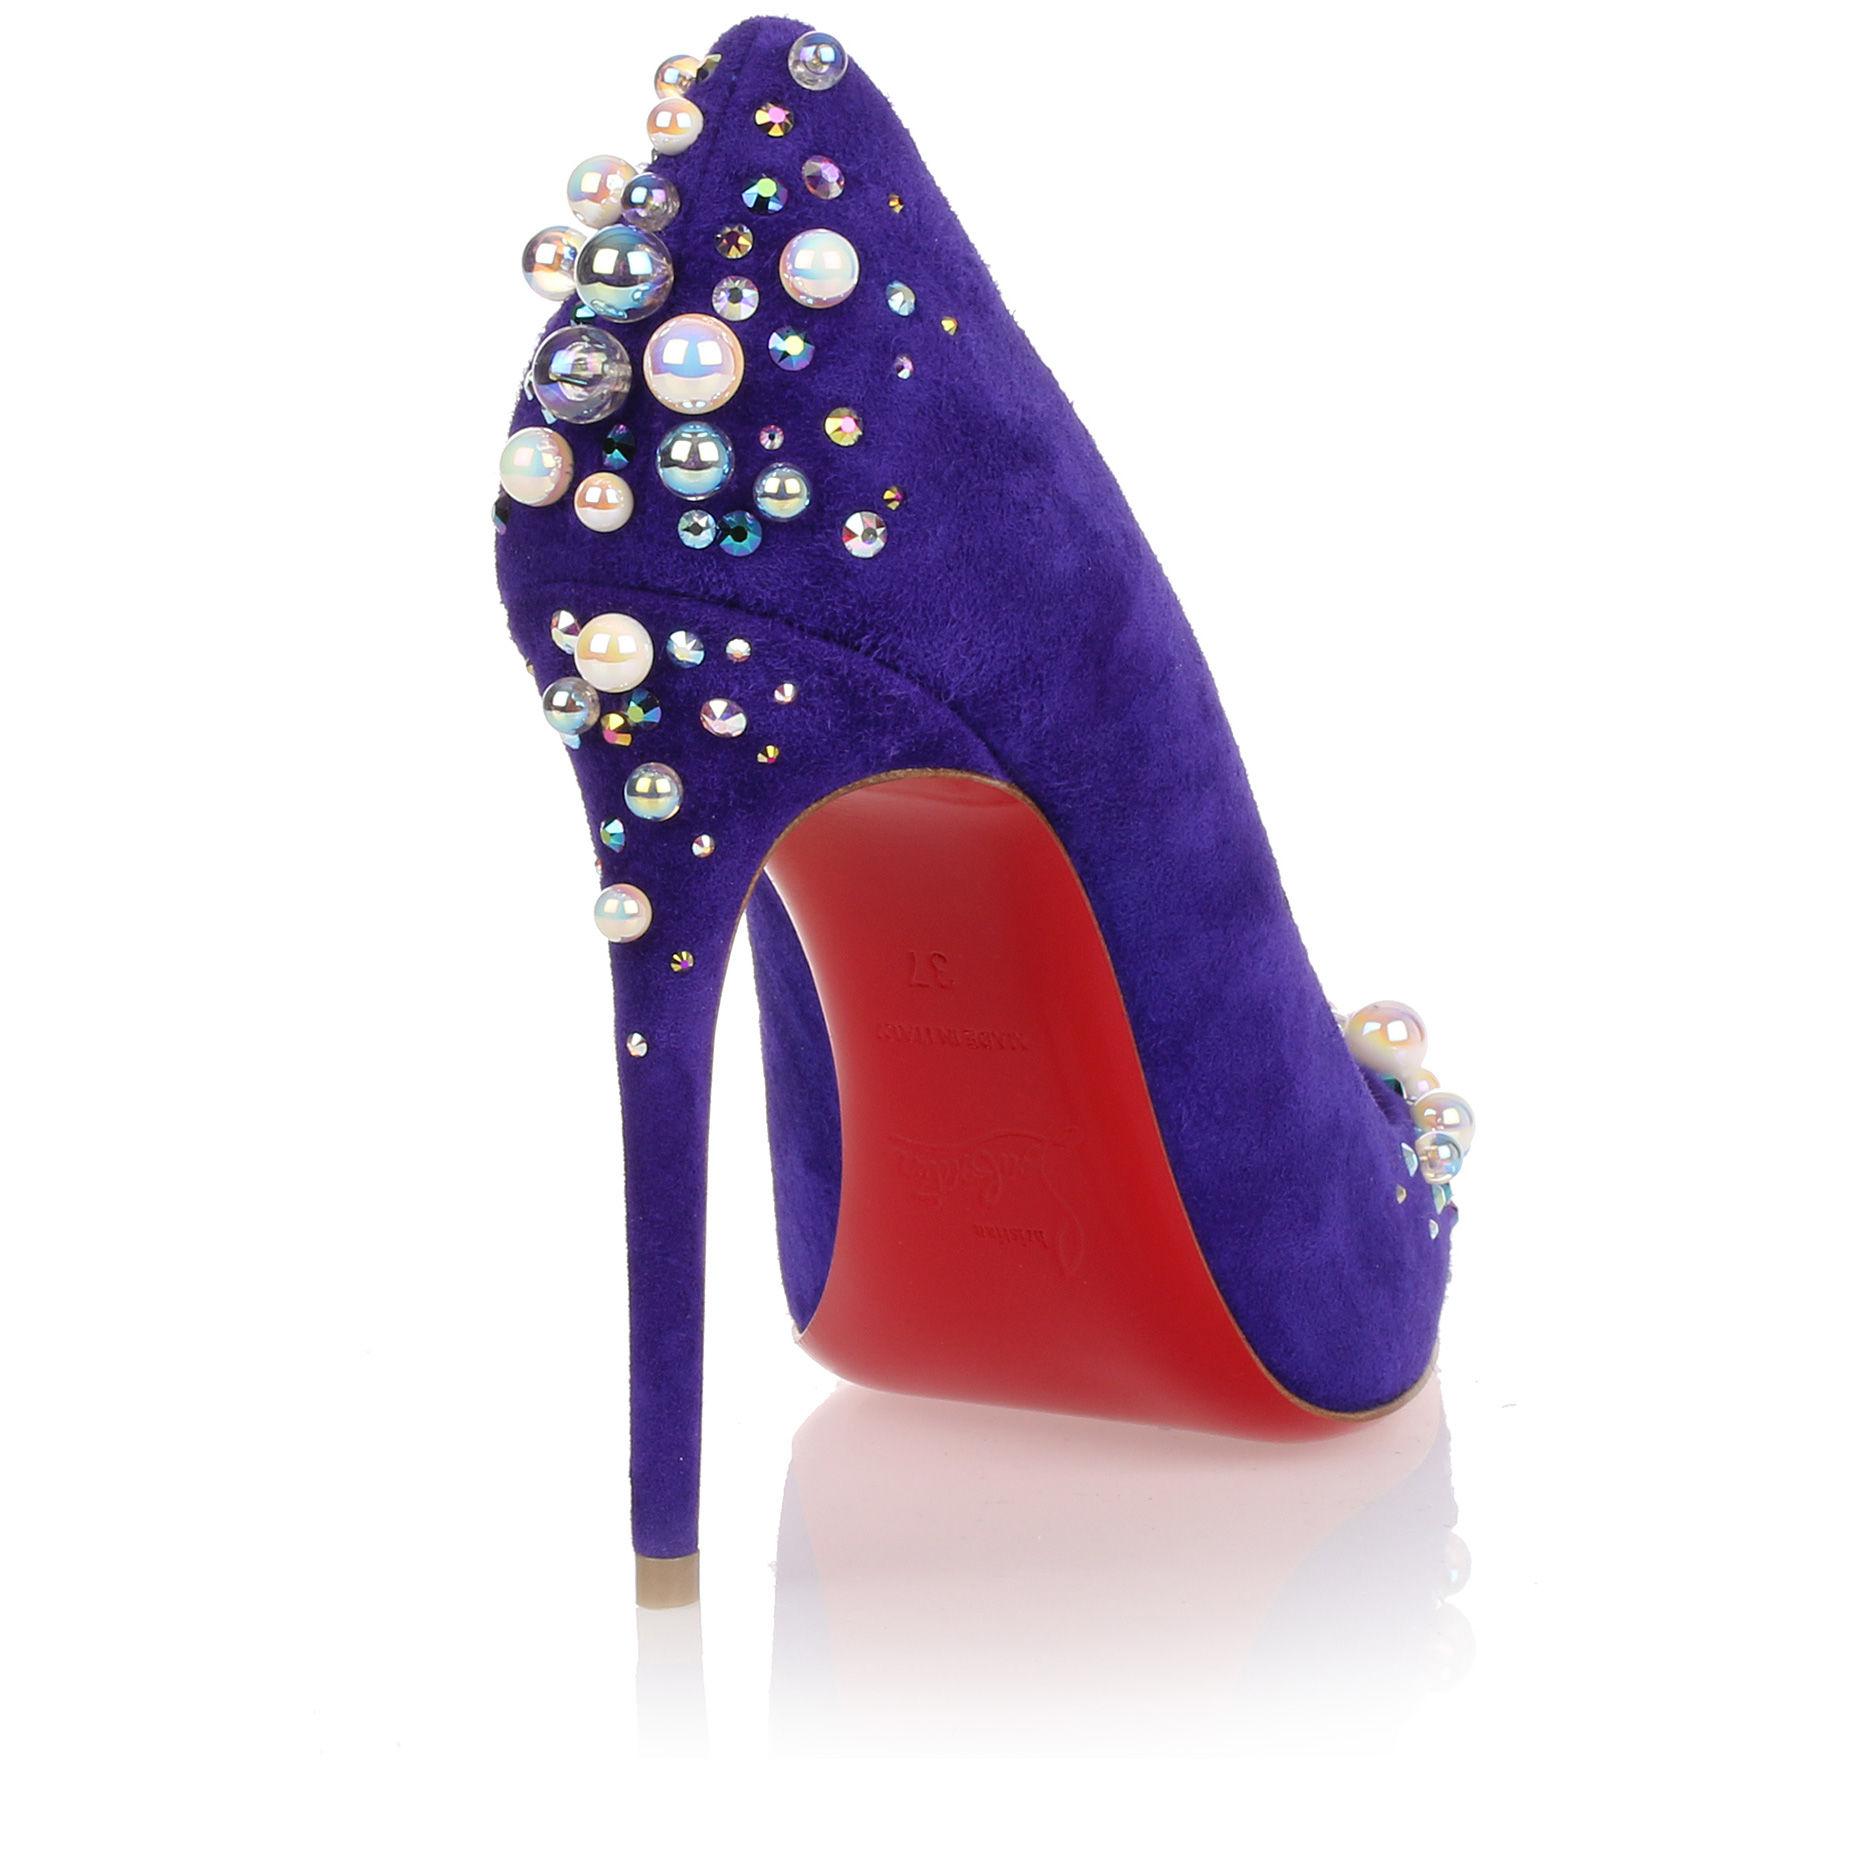 Lyst - Christian Louboutin Candidate 100 Purple Suede Embellished Pump ...